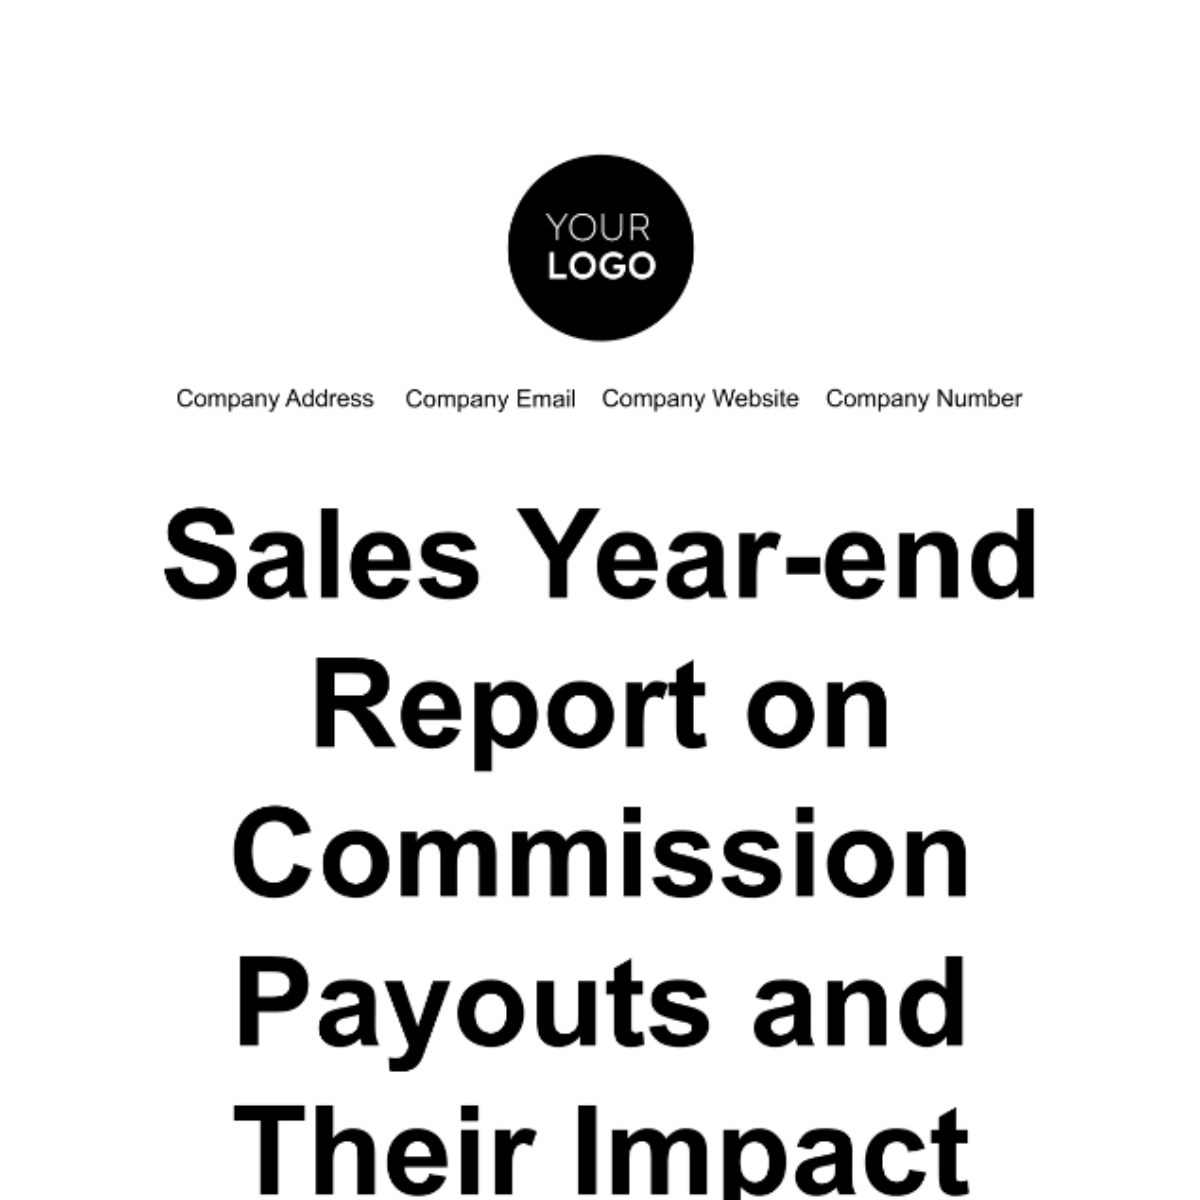 Sales Year-end Report on Commission Payouts and Their Impact on Profitability Template